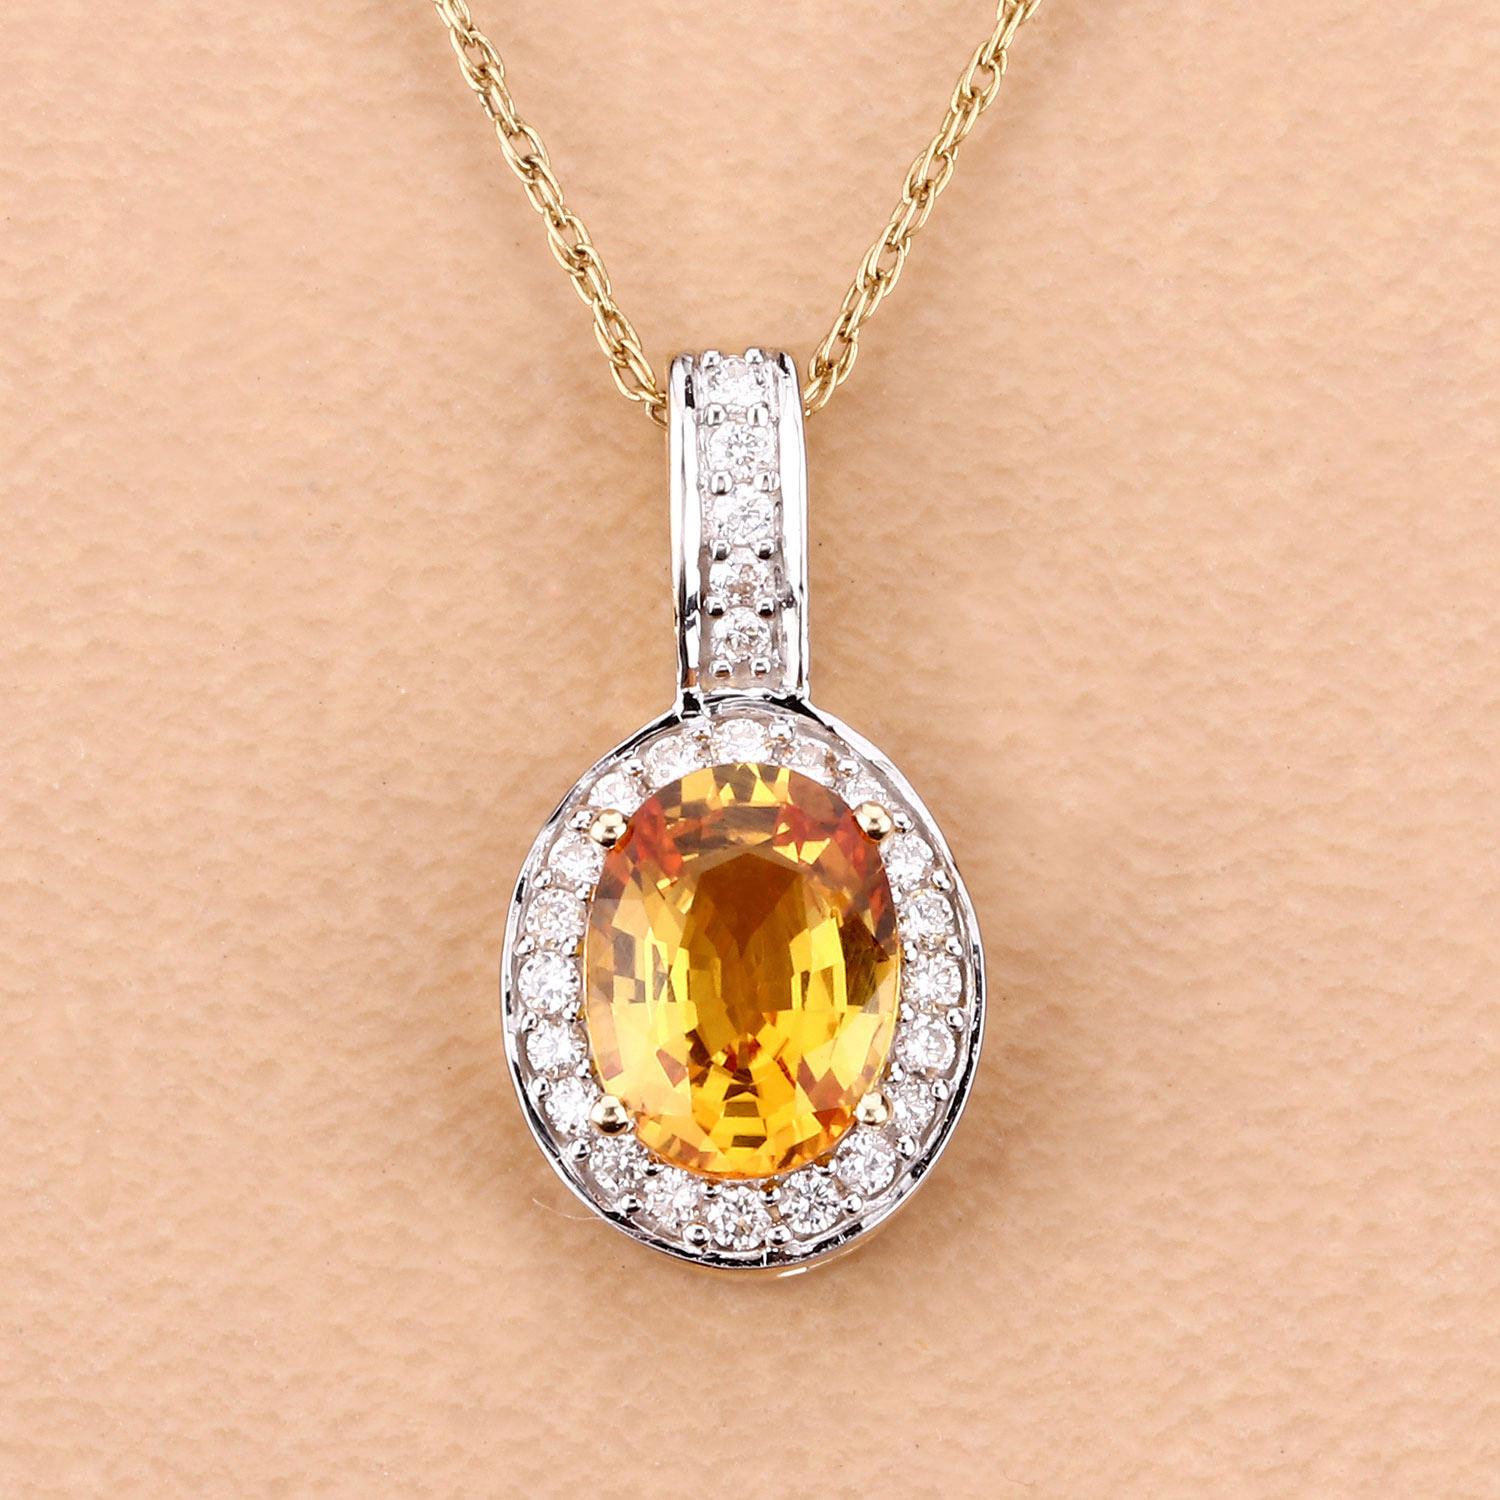 It comes with the appraisal by GIA GG/AJP
Sapphire = 1.60 Carat ( 8 x 6 mm )
Cut: Oval
Total Quantity of Sapphire: 1
Primary Stone Color: Yellow
Diamonds = 0.20 Carats
Total Quantity of Diamonds: 25
Metal: 14K Yellow Gold
Dimensions: 19 x 10 x 5.5 mm